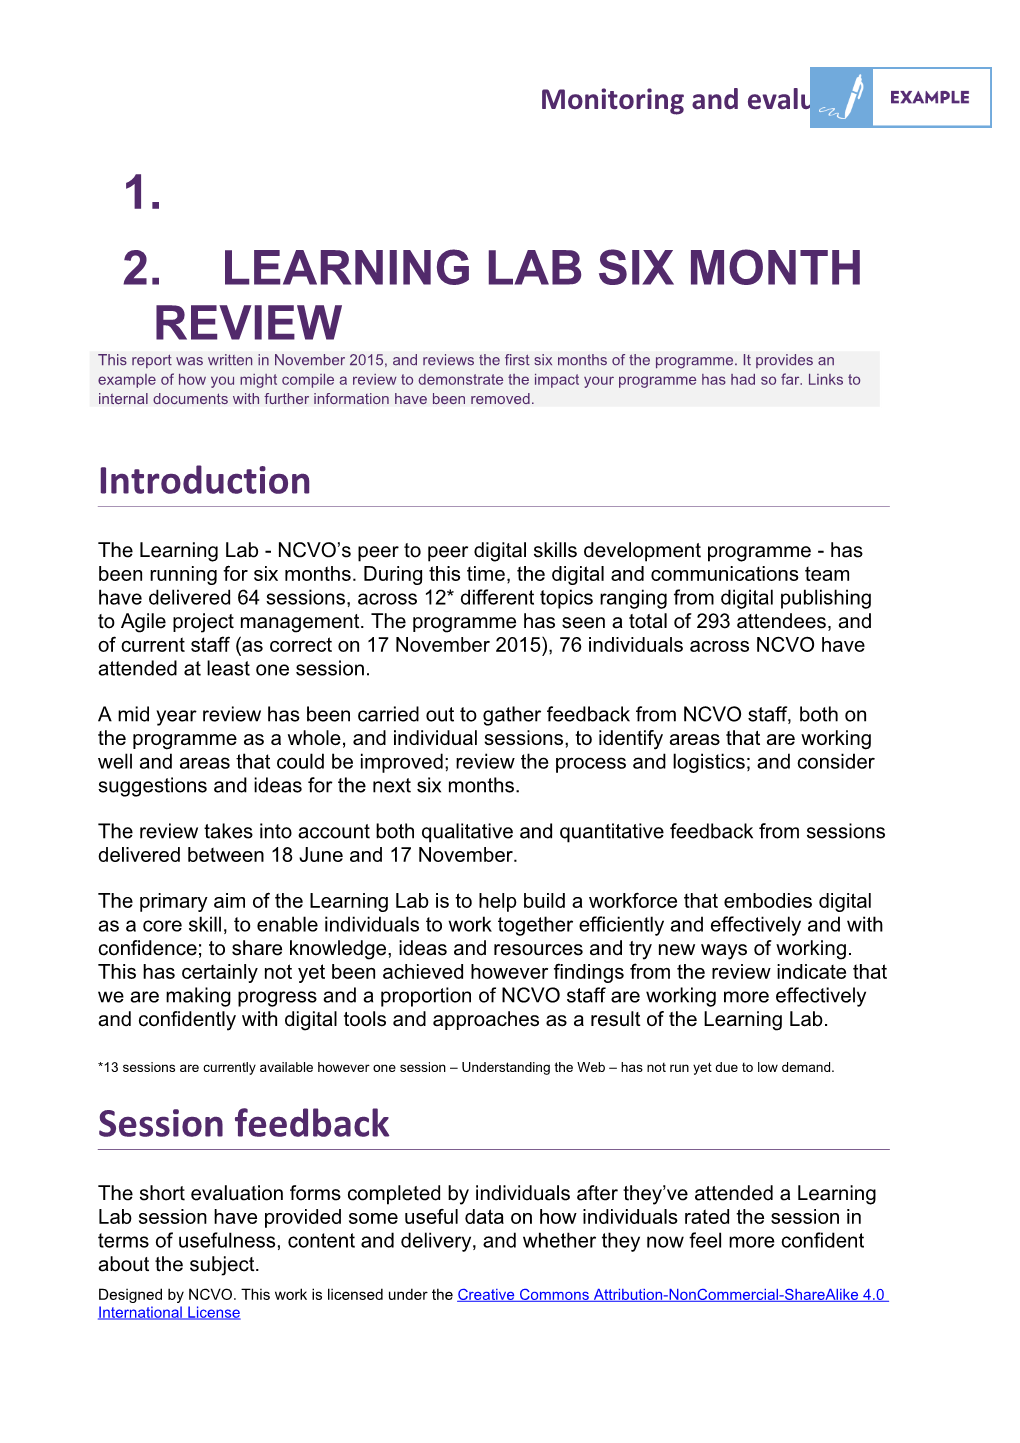 Learning Lab Six Month Review